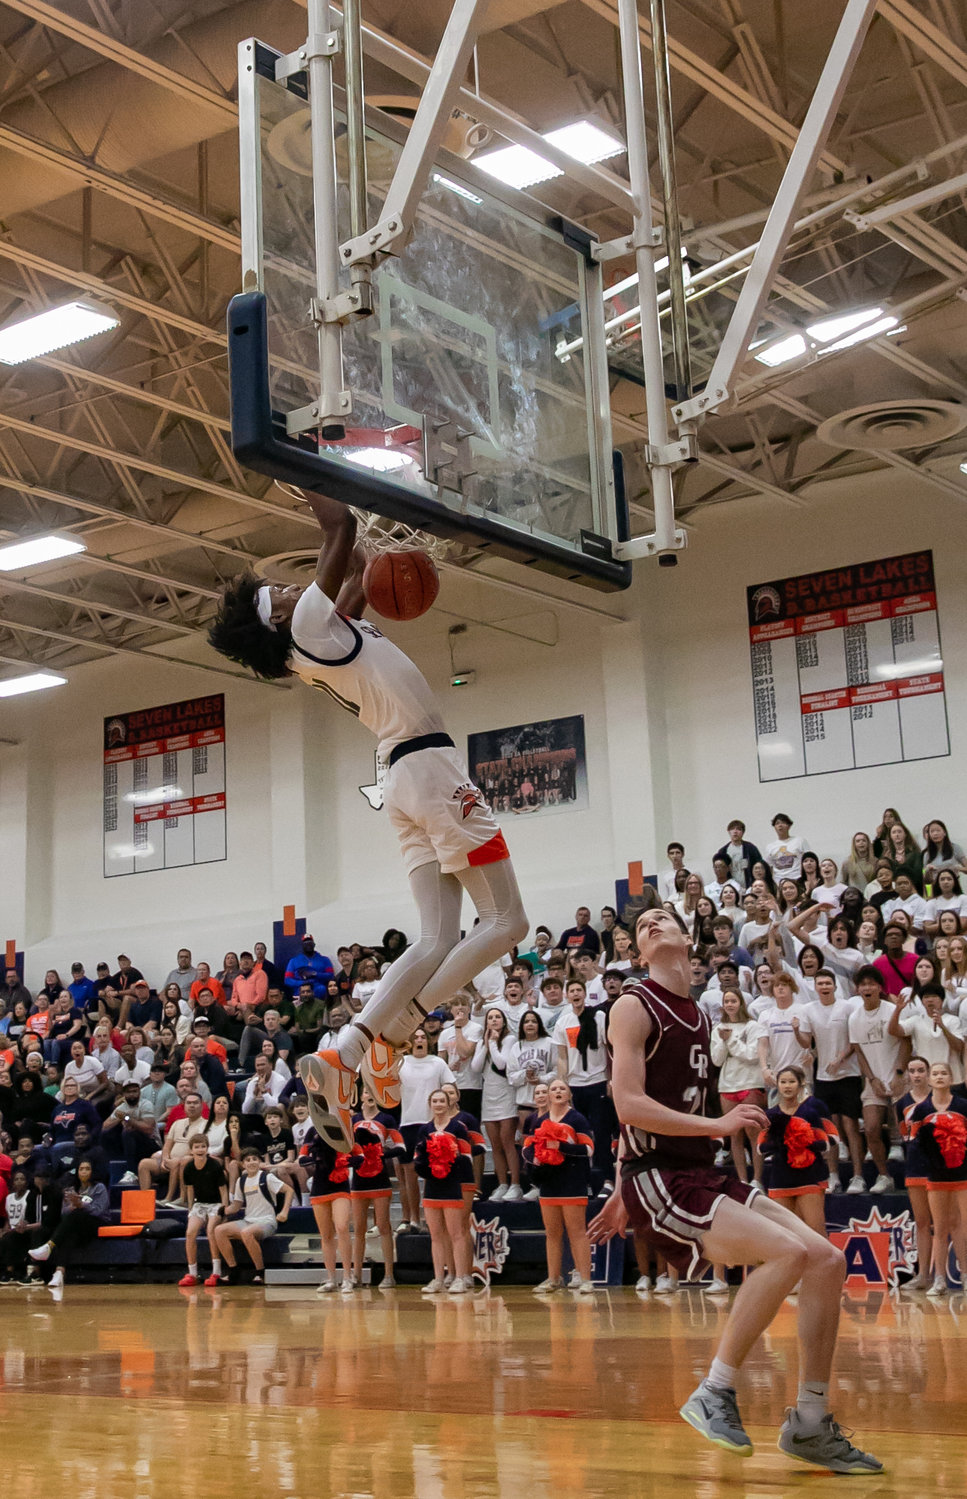 Nasir Price throws down a dunk during Saturday's game between Seven Lakes and Cinco Ranch at the Seven Lakes gym.